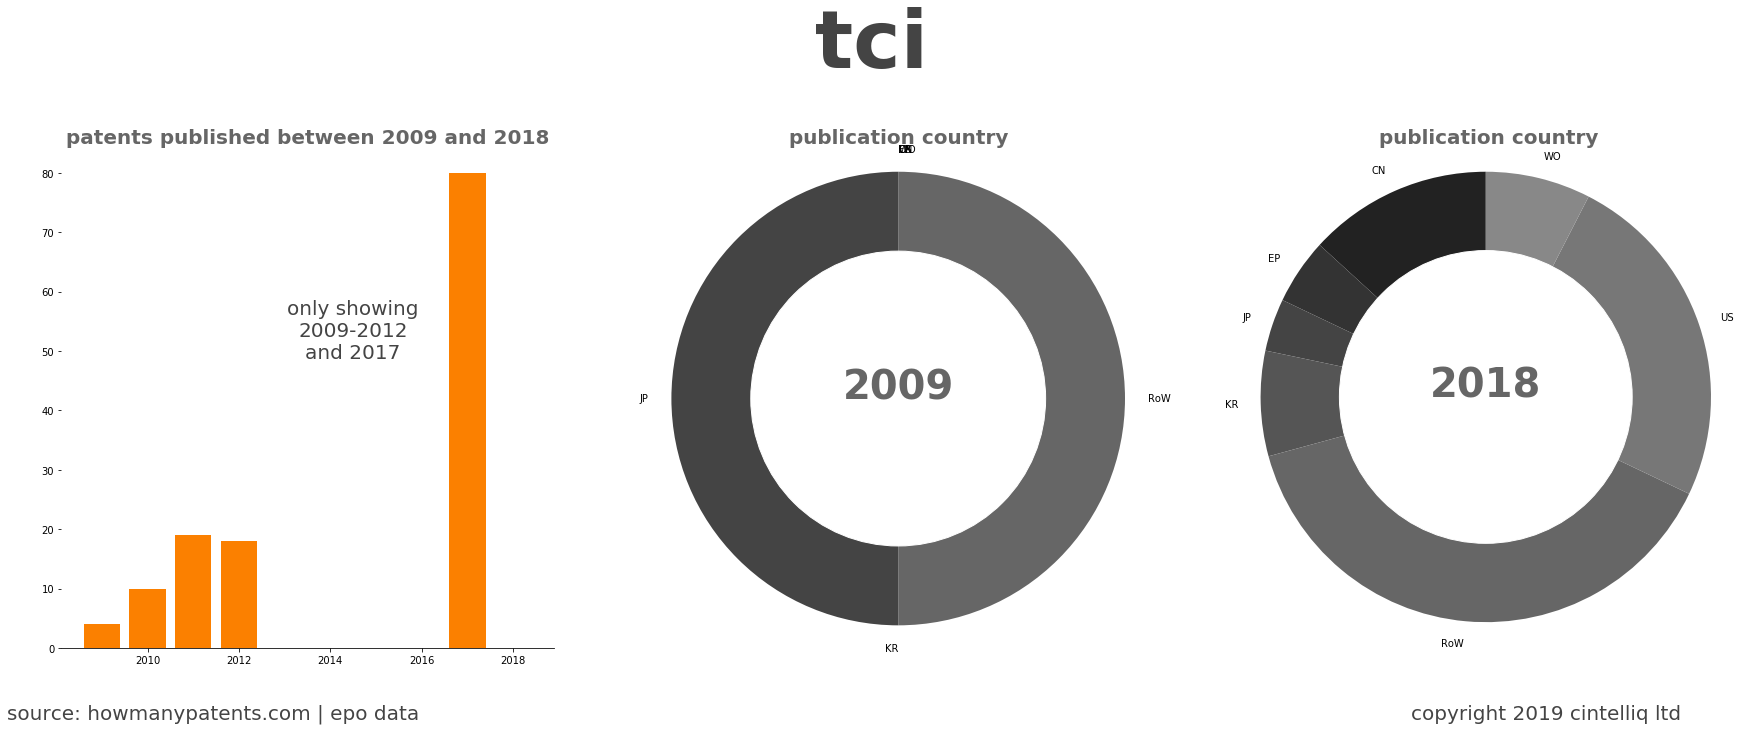 summary of patents for Tci